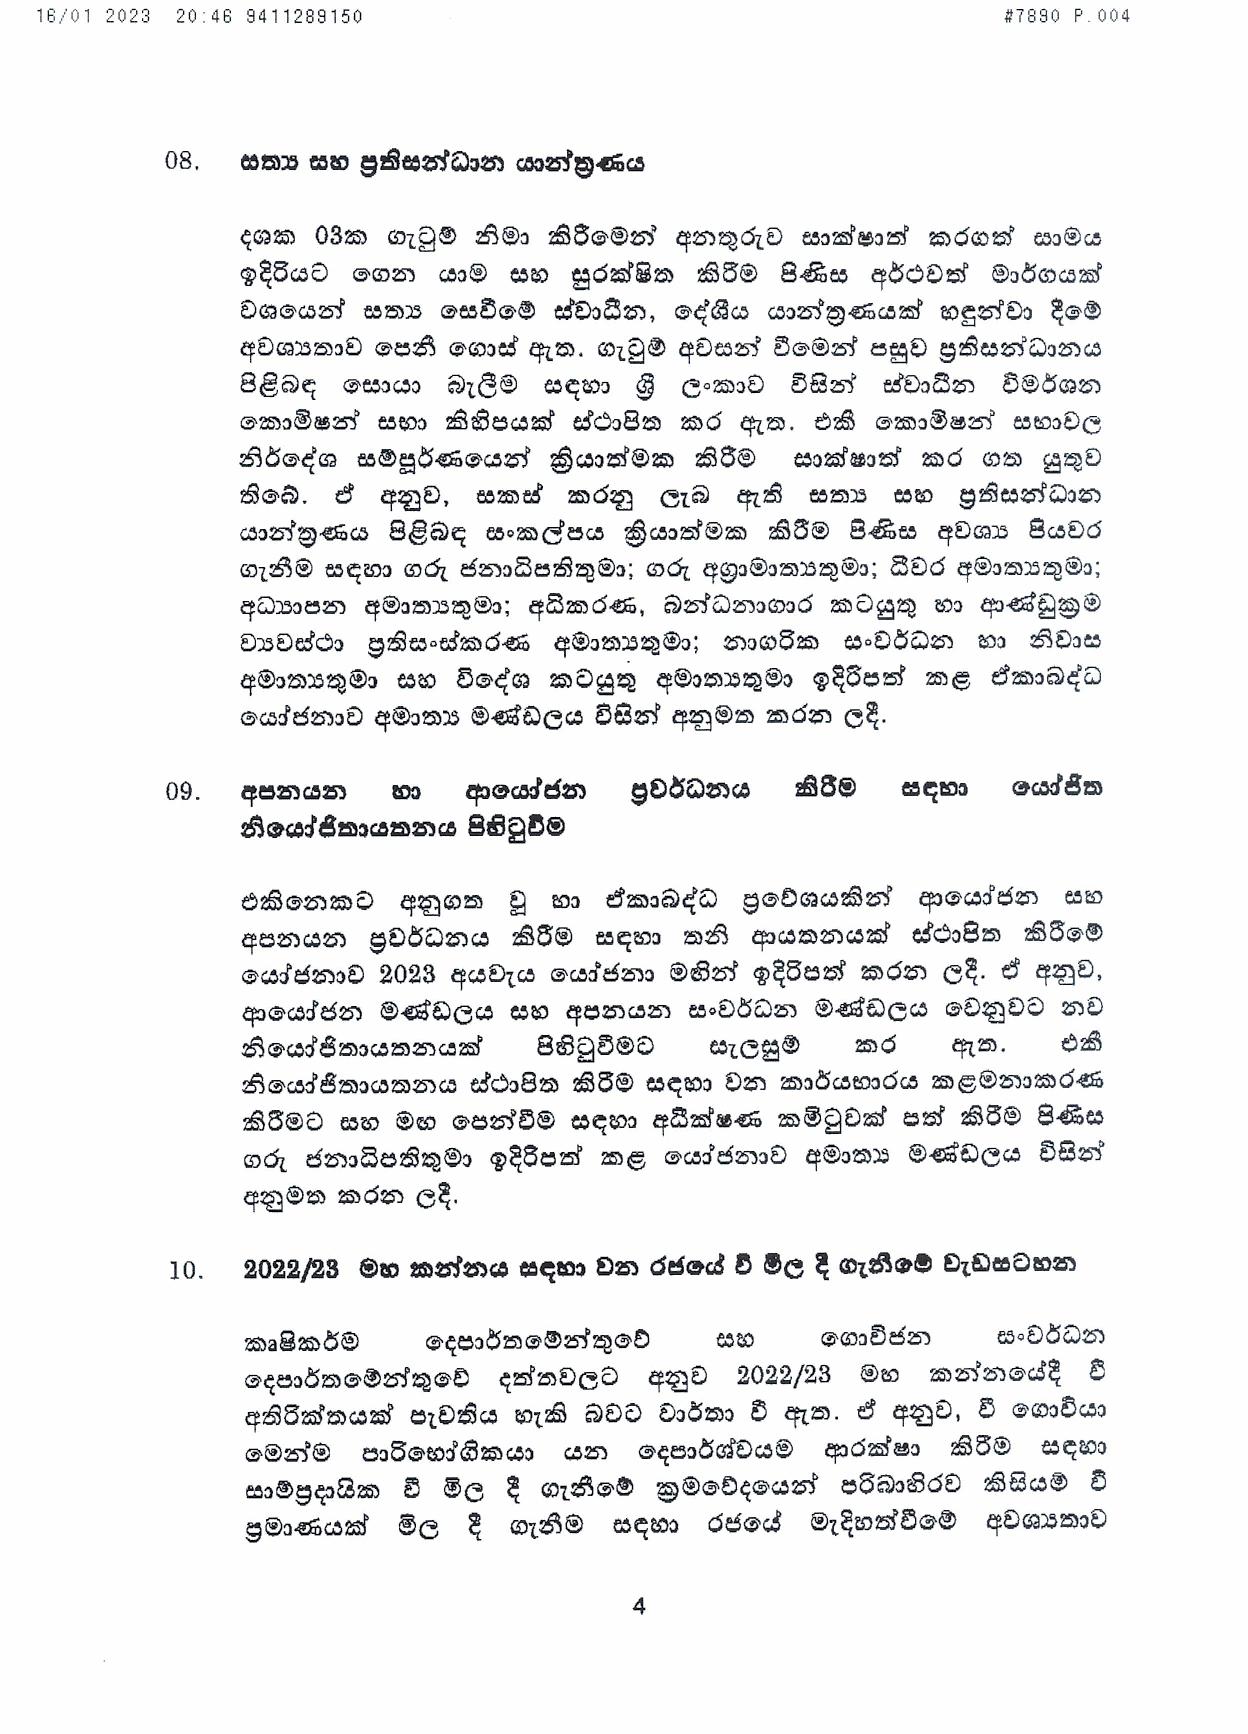 Cabinet Decision on 16.01.2023 page 004